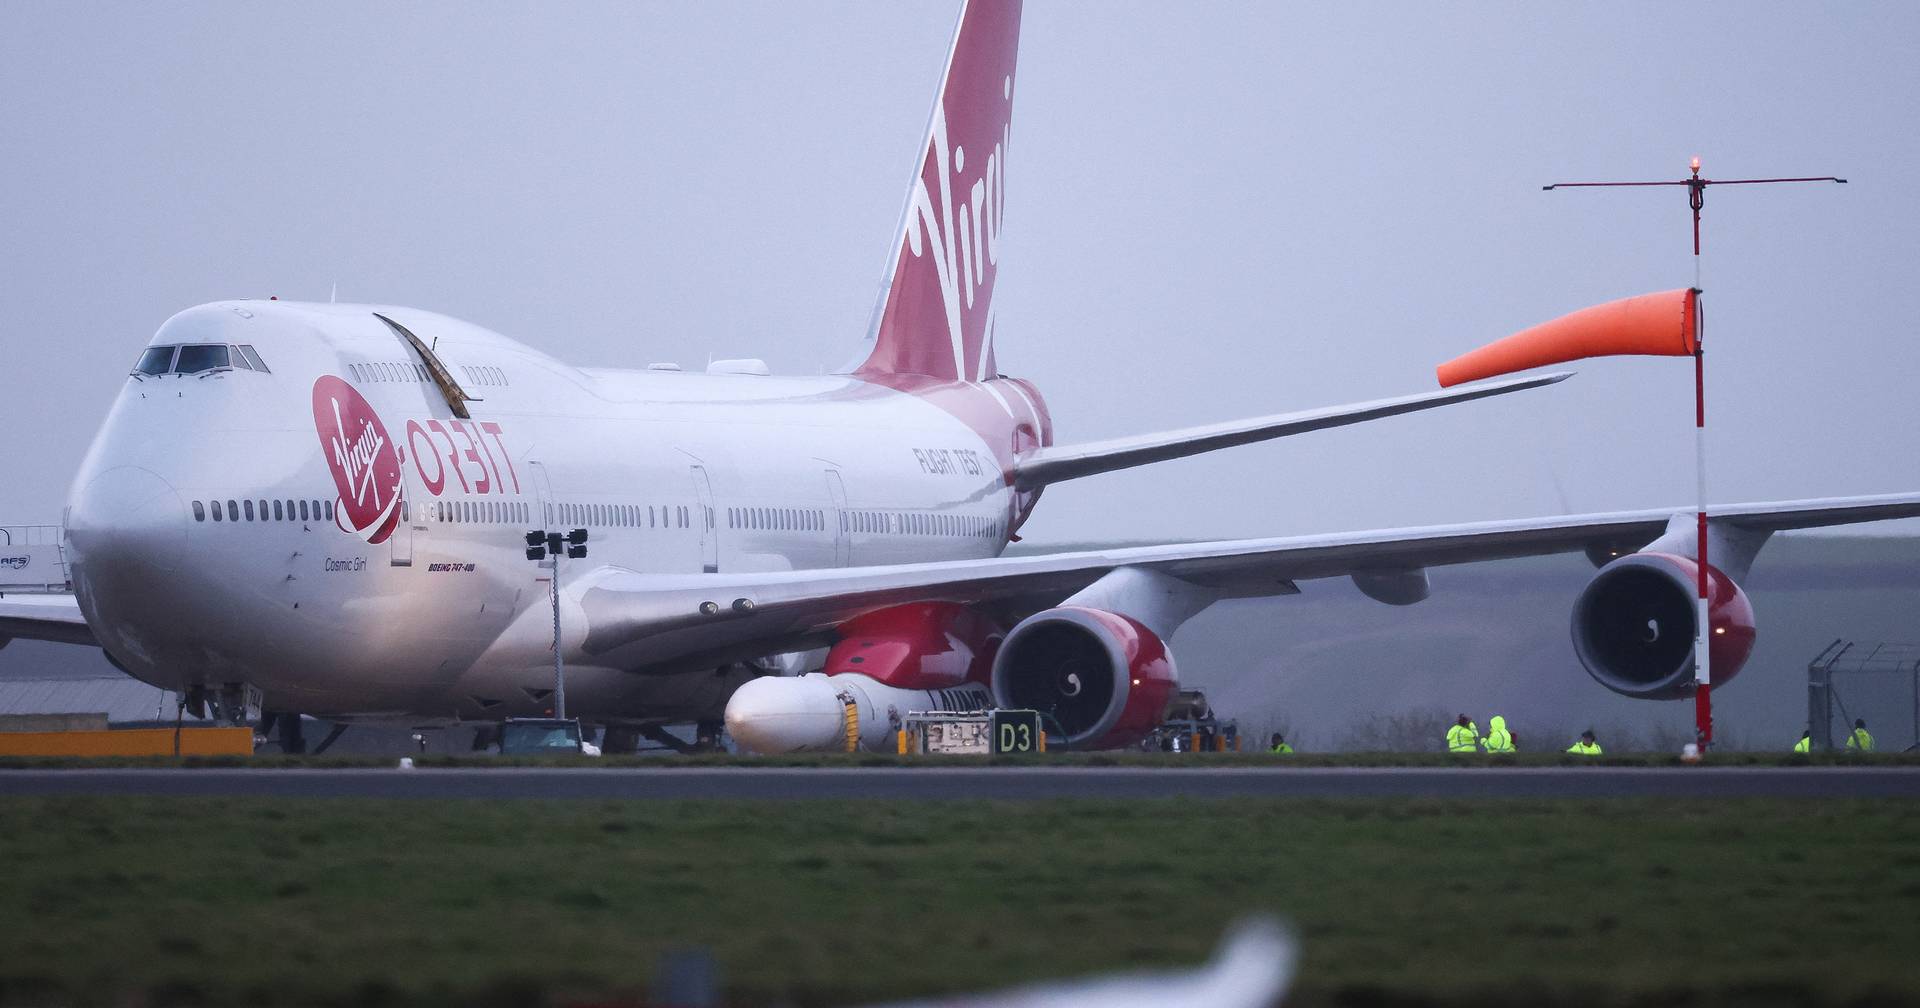 After its failed mission in January, Virgin Orbit declares bankruptcy.